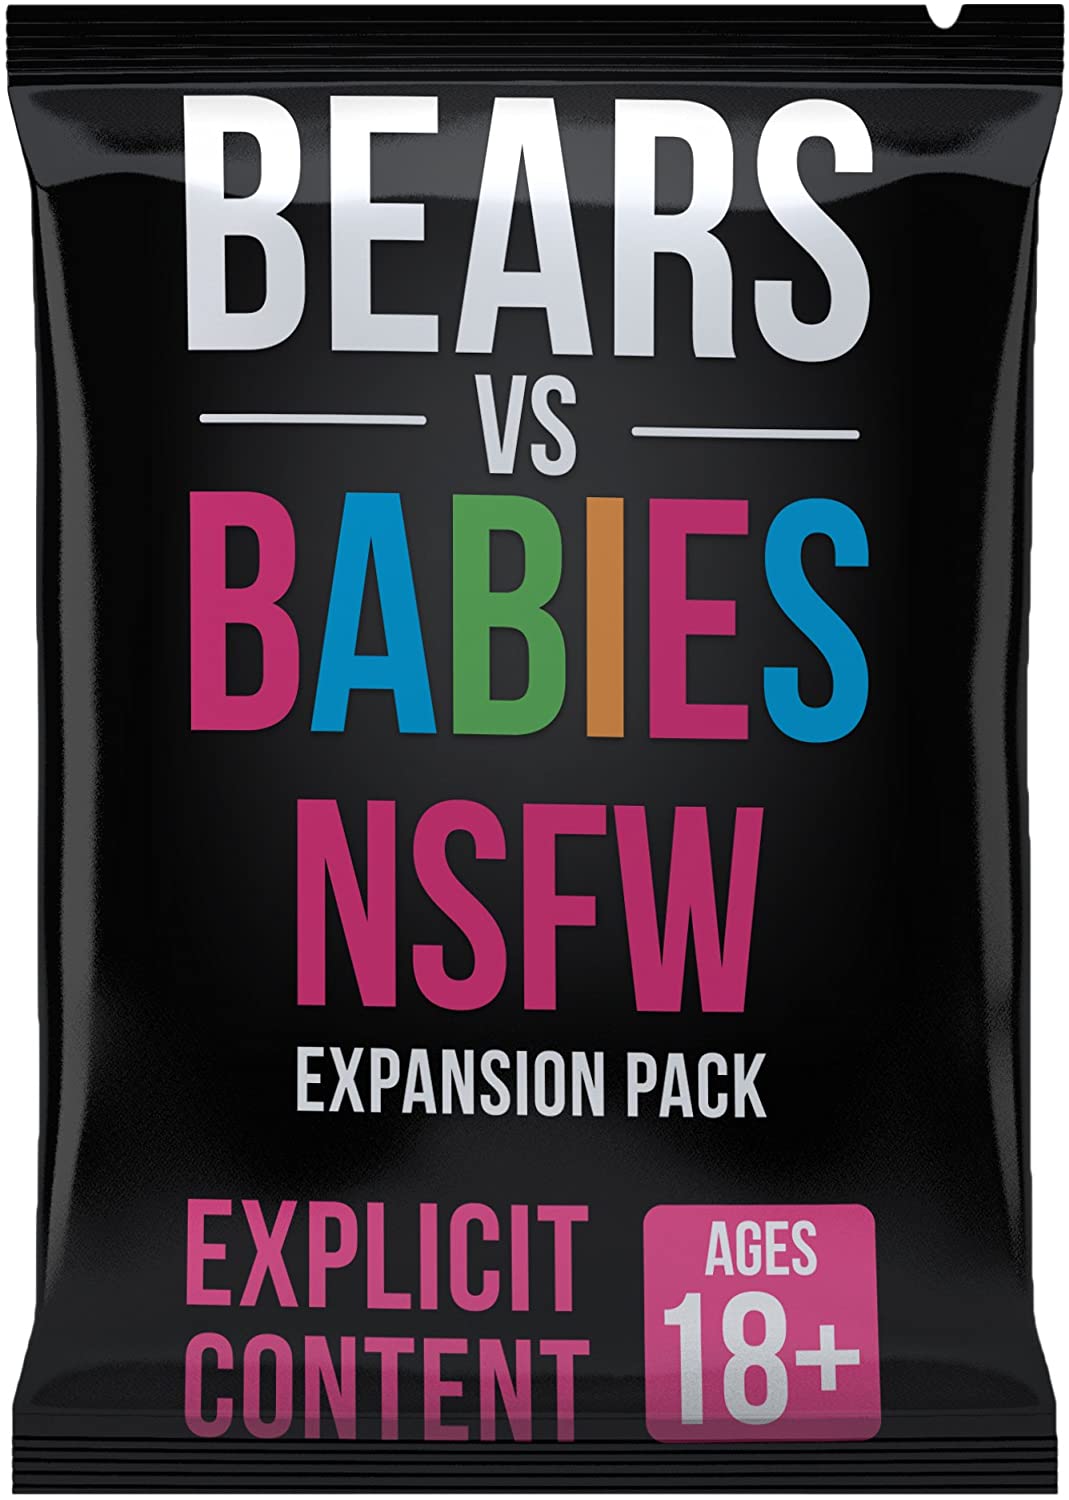 Bears vs. Babies: NSFW Expansion Pack